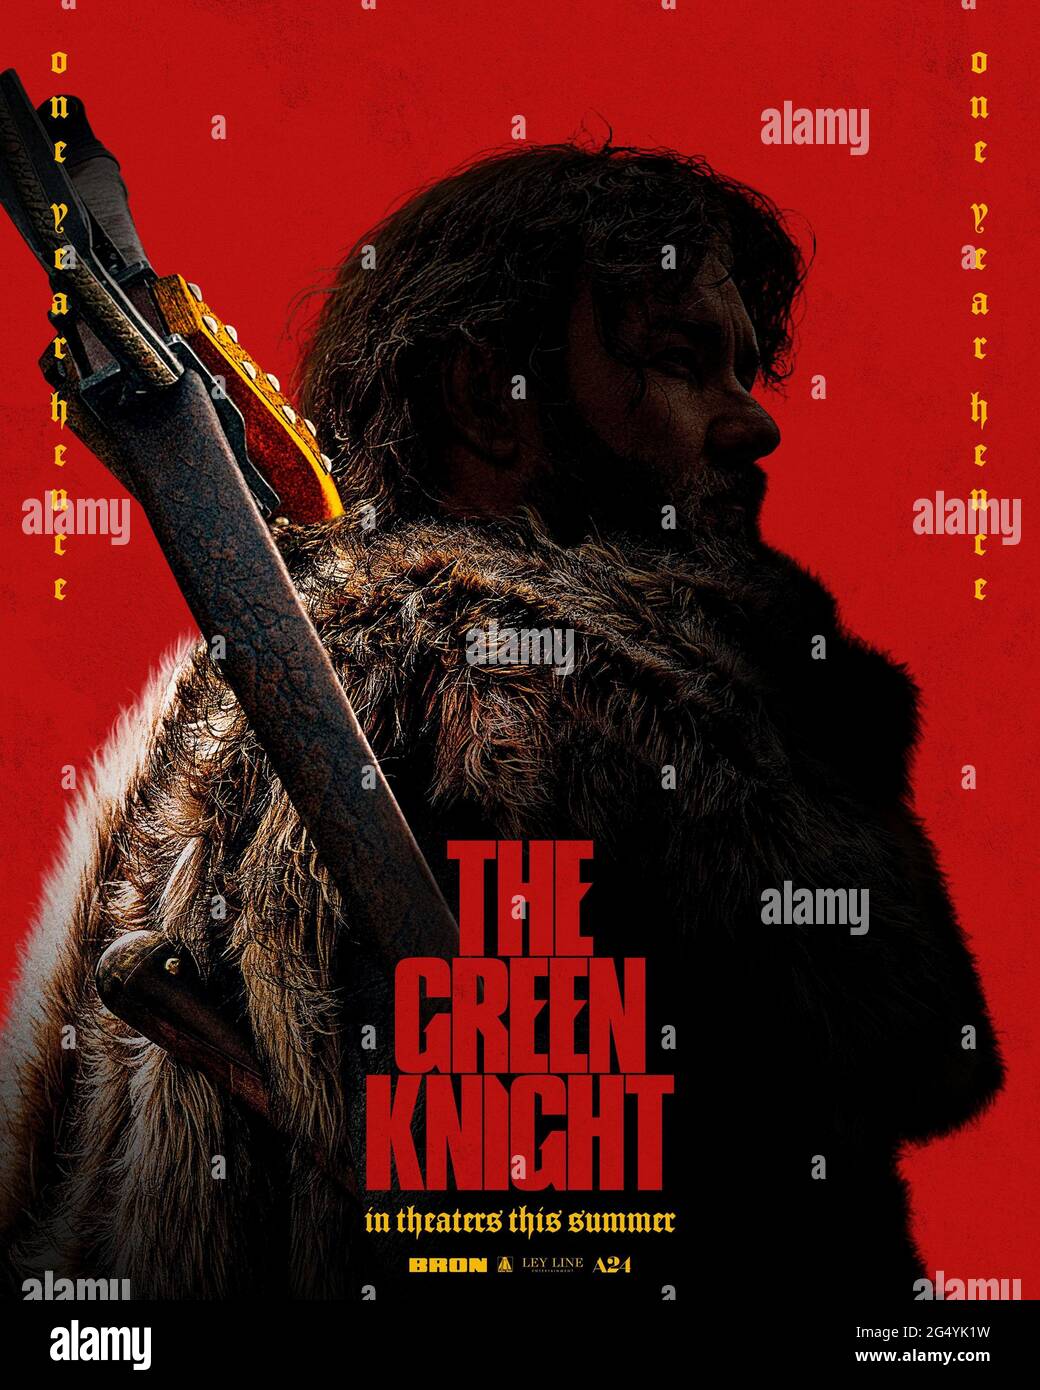 The Green Knight (2021) directed by David Lowery and starring Joel Edgerton as the Lord in this fantasy re-telling of the medieval Arthurian story of Sir Gawain and the Green Knight. Stock Photo